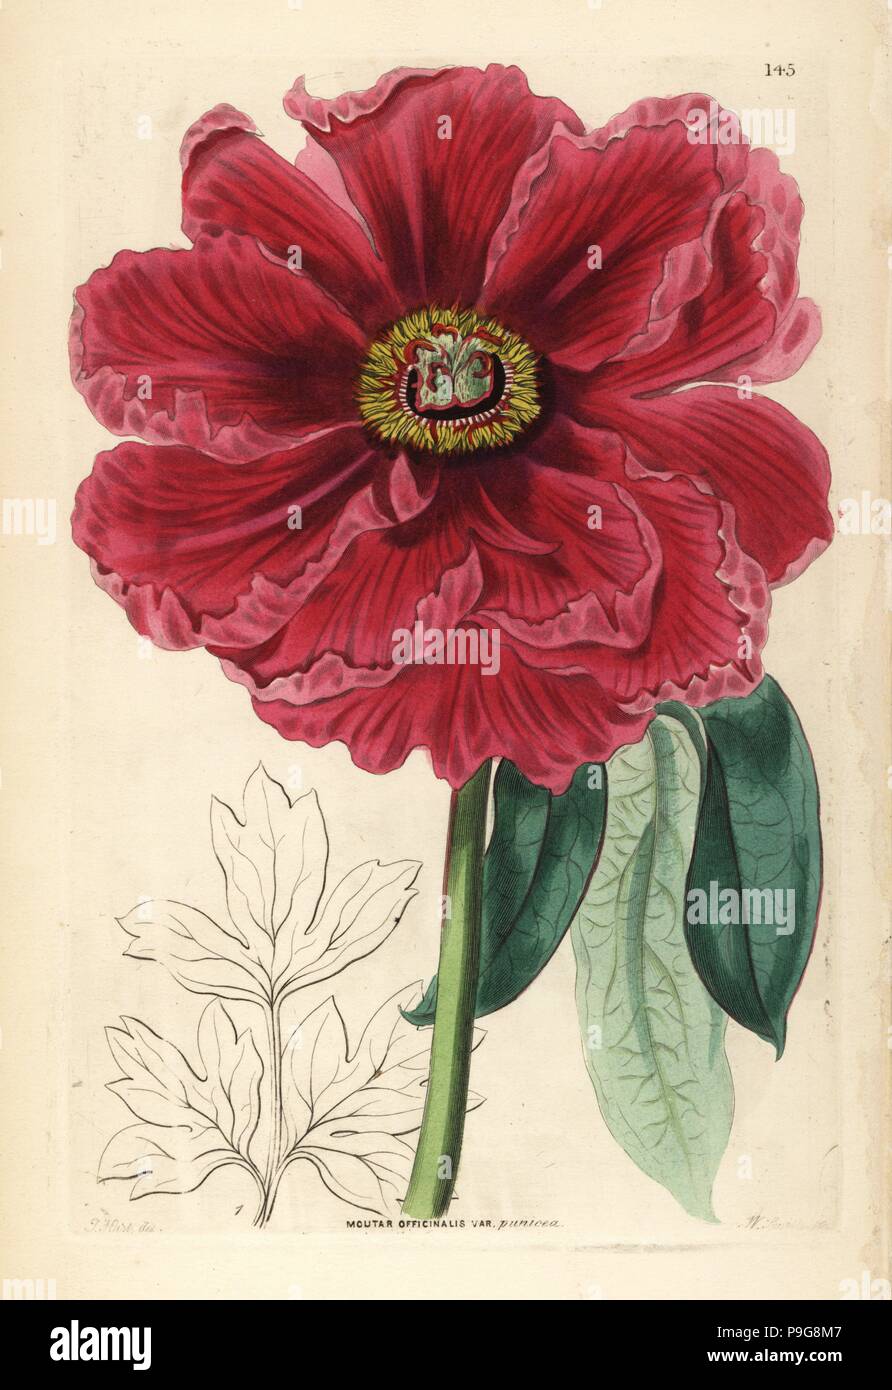 Tree peony, Paeonia officinalis (Carmine-flowered moutan, Moutan officinalis var. punicea). Handcoloured copperplate engraving by Frederick W. Smith after J.T. Hart from John Lindley and Robert Sweet's Ornamental Flower Garden and Shrubbery, G. Willis, London, 1854. Stock Photo